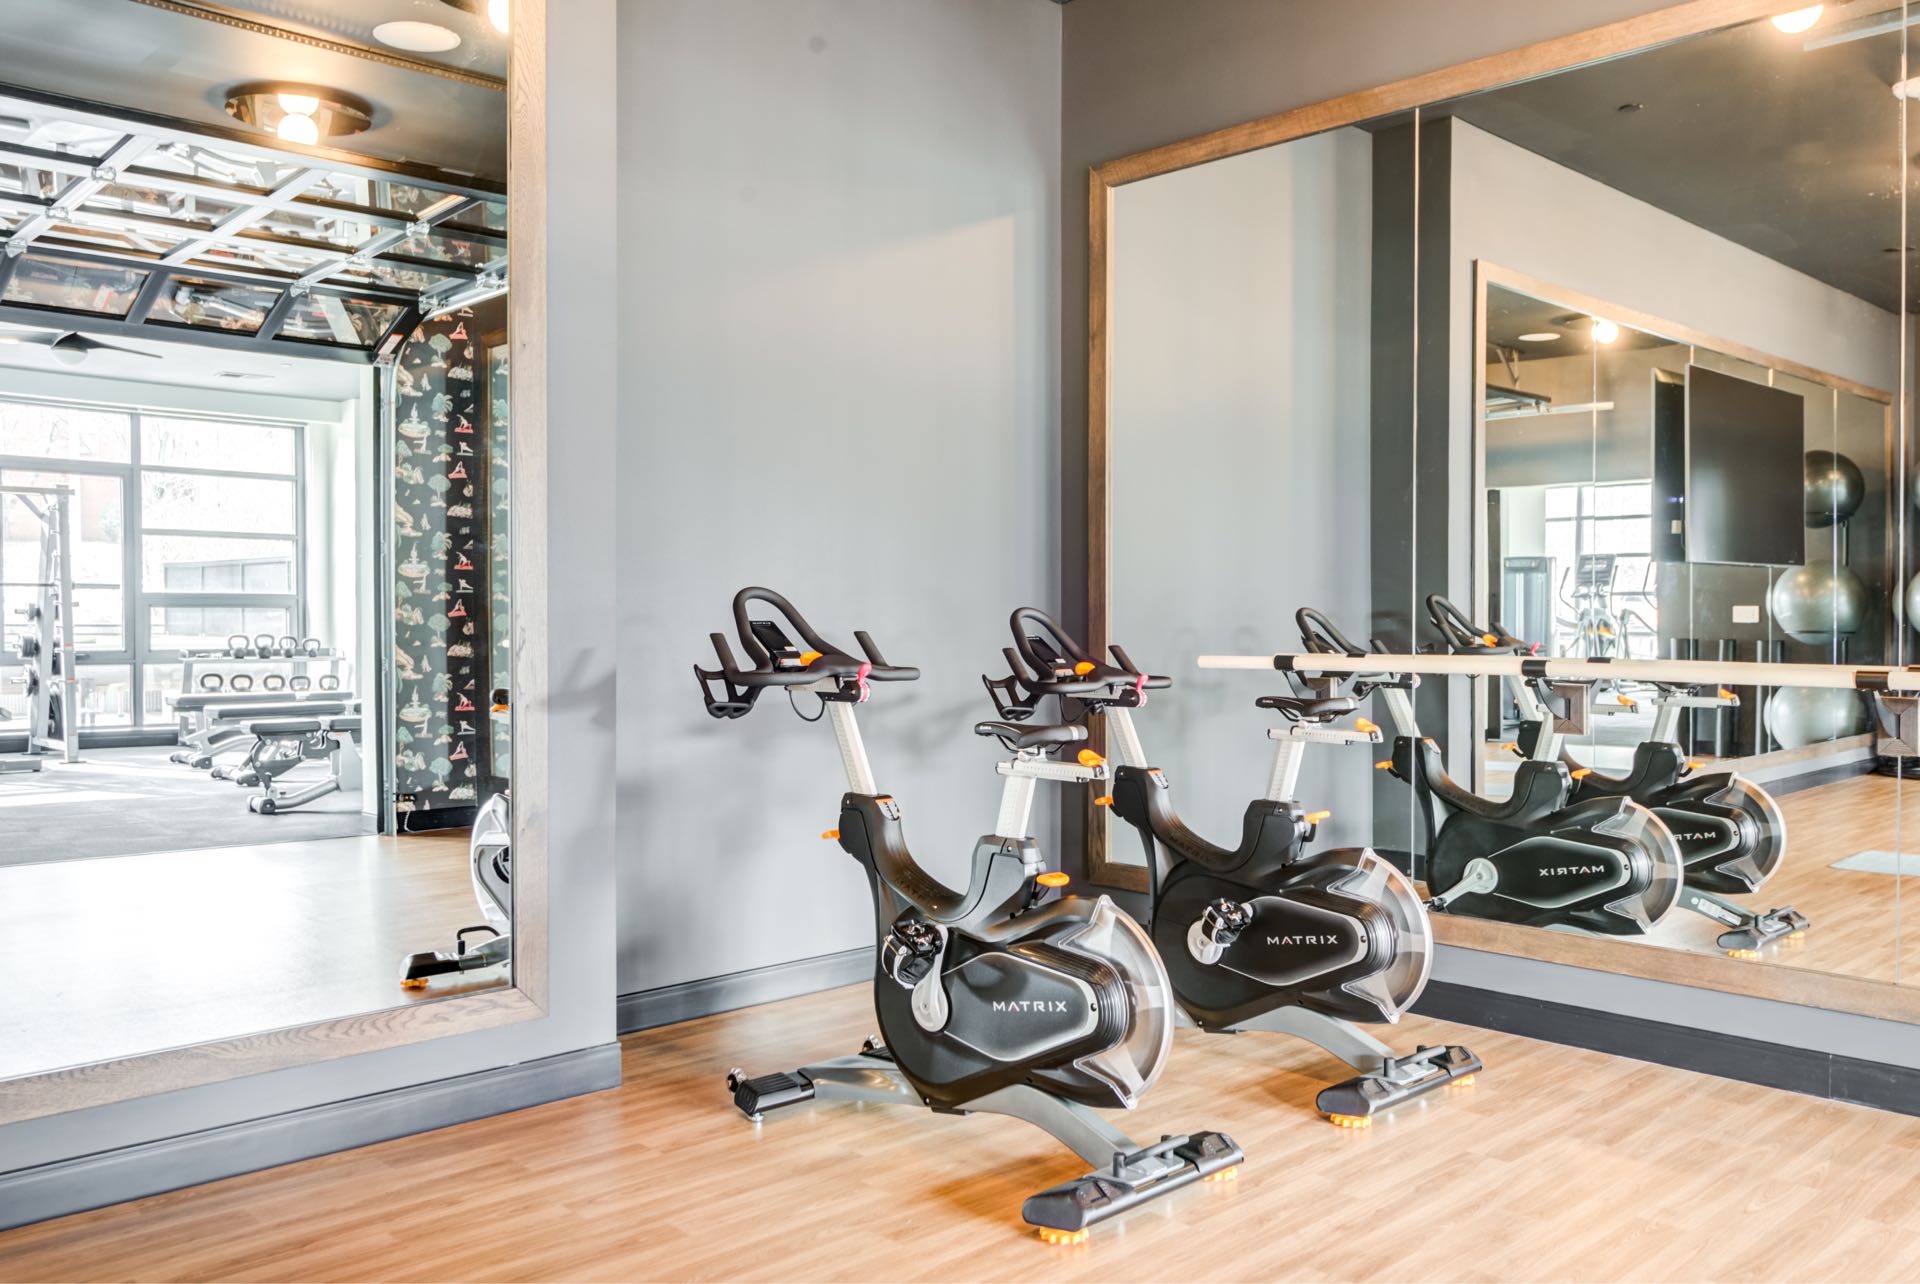 Work up a mid-day sweat on our spin bikes